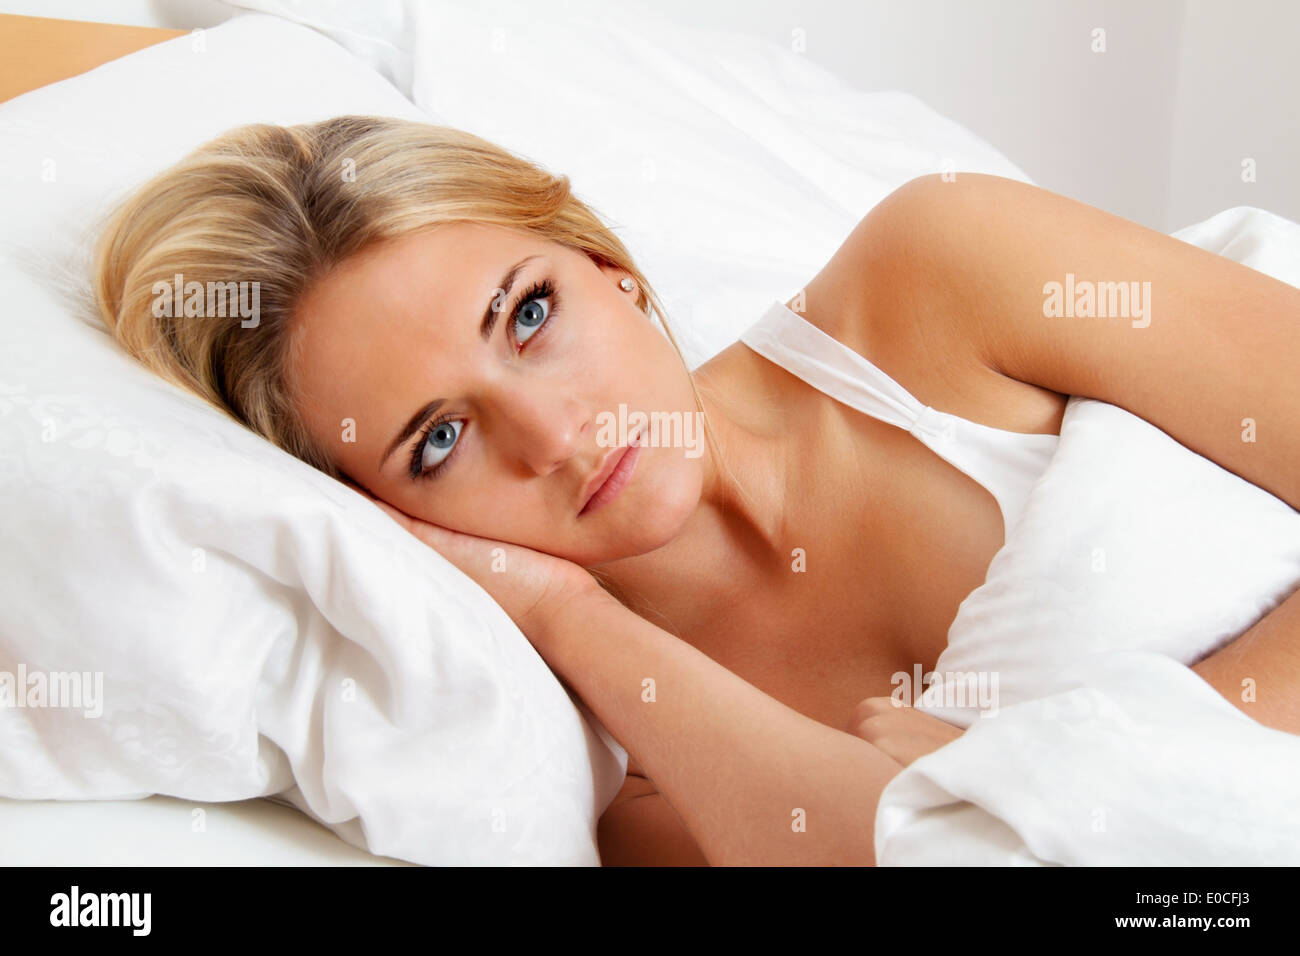 A young woman lies awake in the bed. Sleepless and thoughtfully. Stock Photo